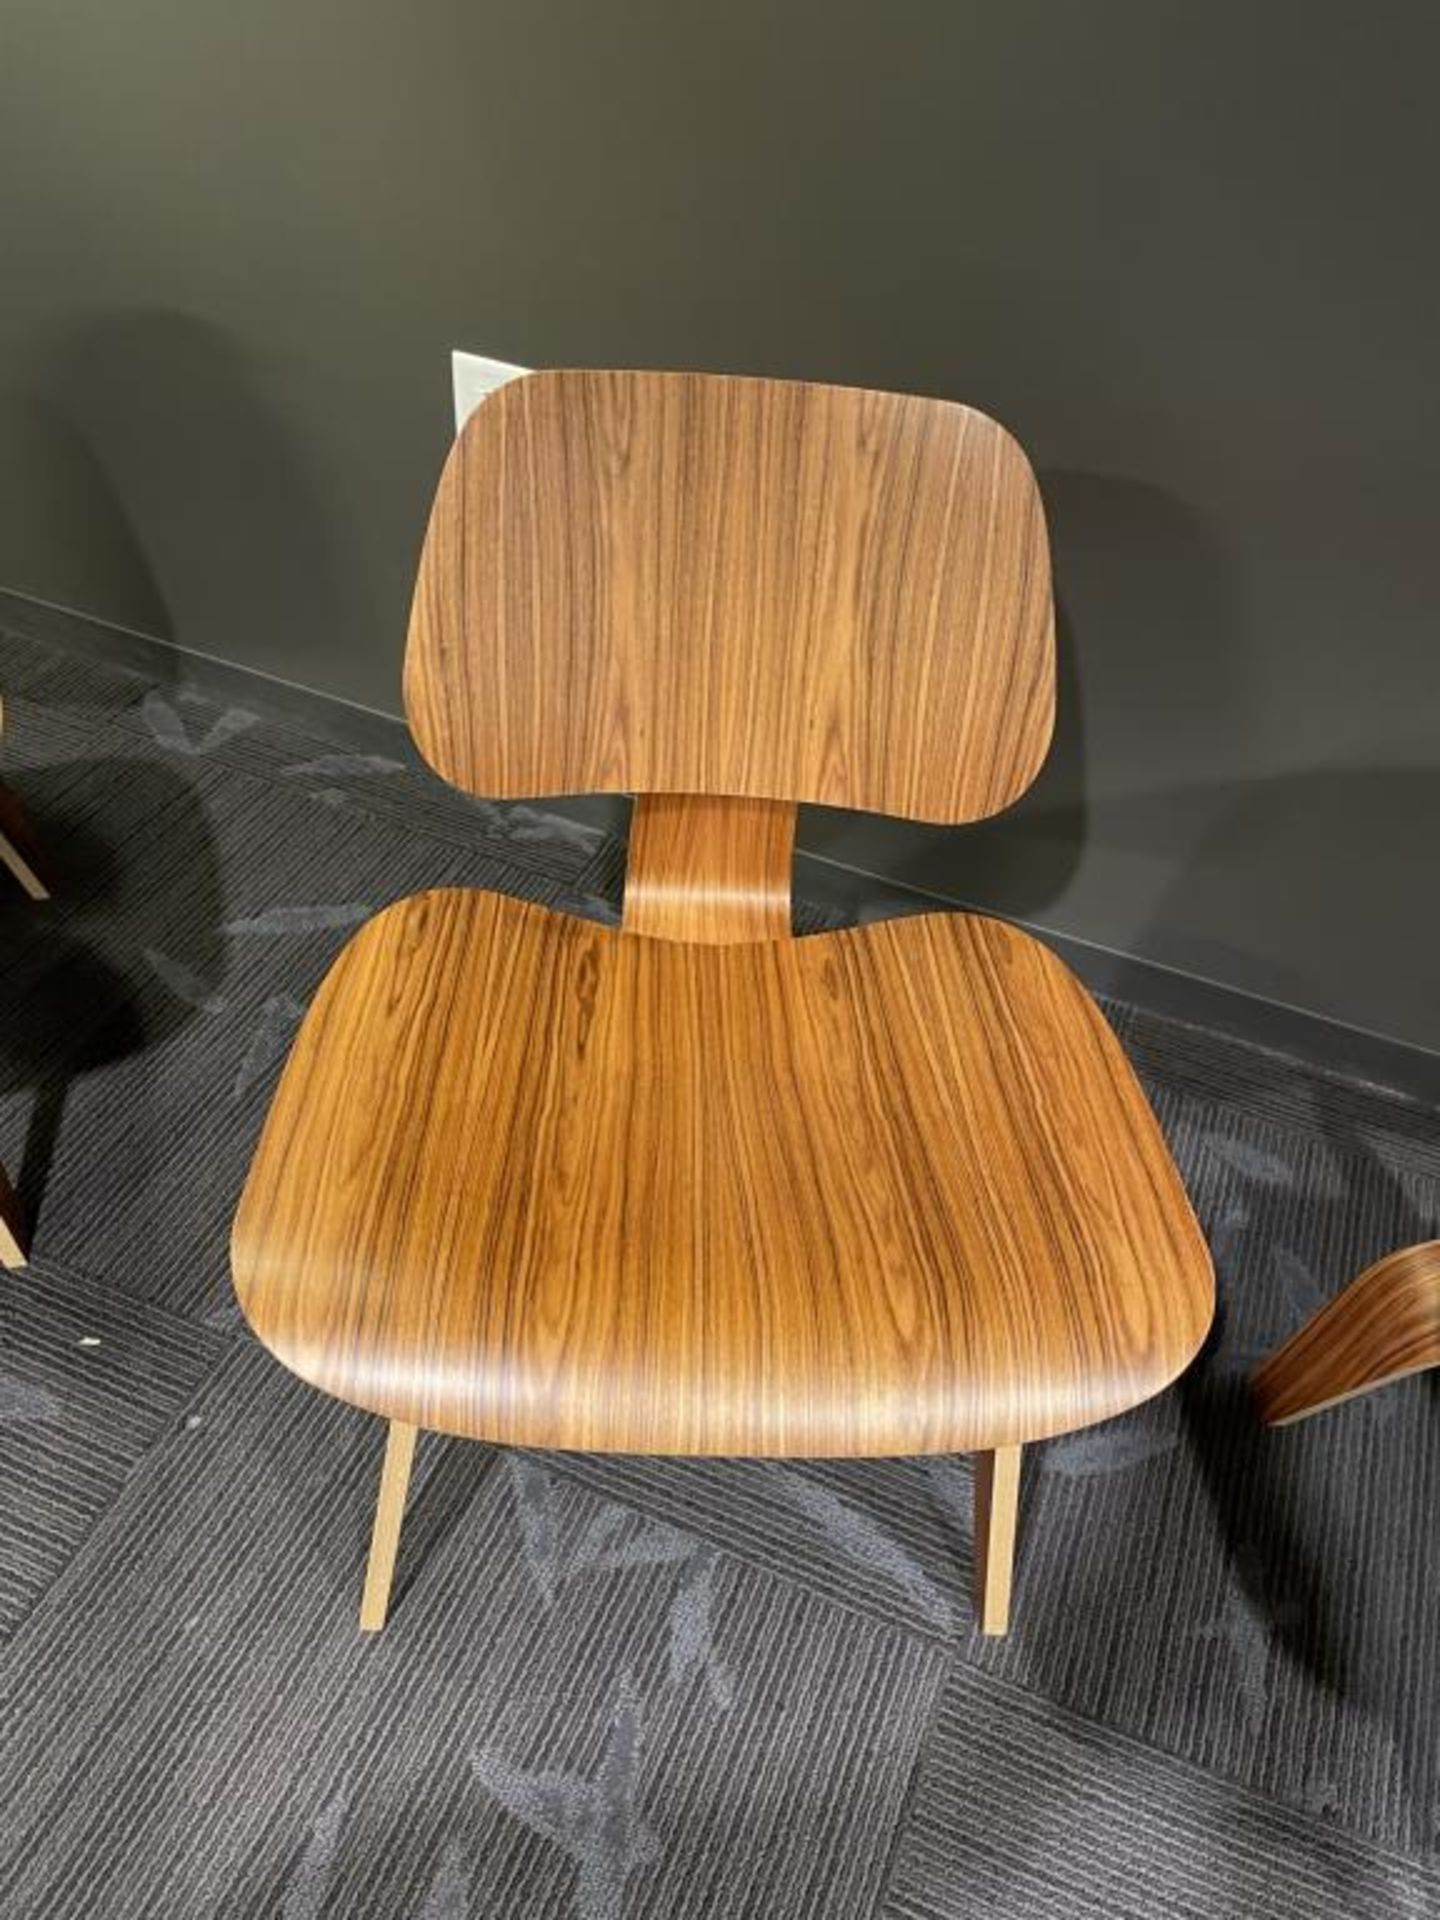 Eames LCW Molded Plywood Lounge Chair - Image 3 of 6